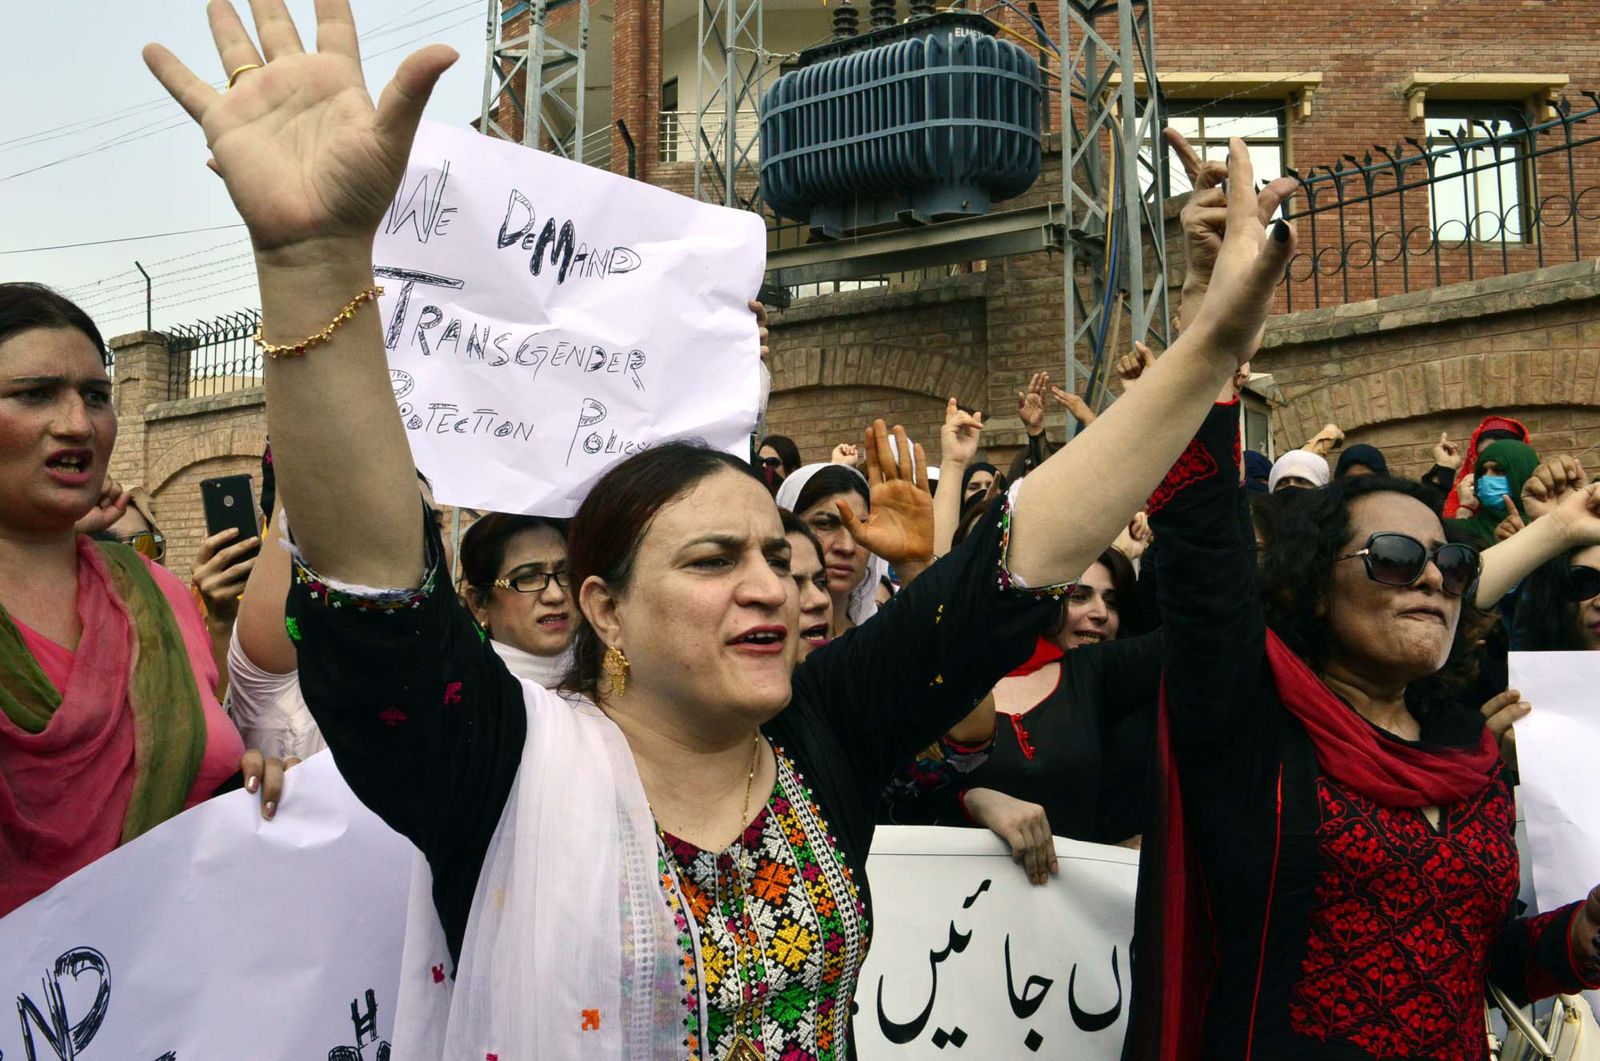 Hijras rallying for their rights in Peshawar in 2018.